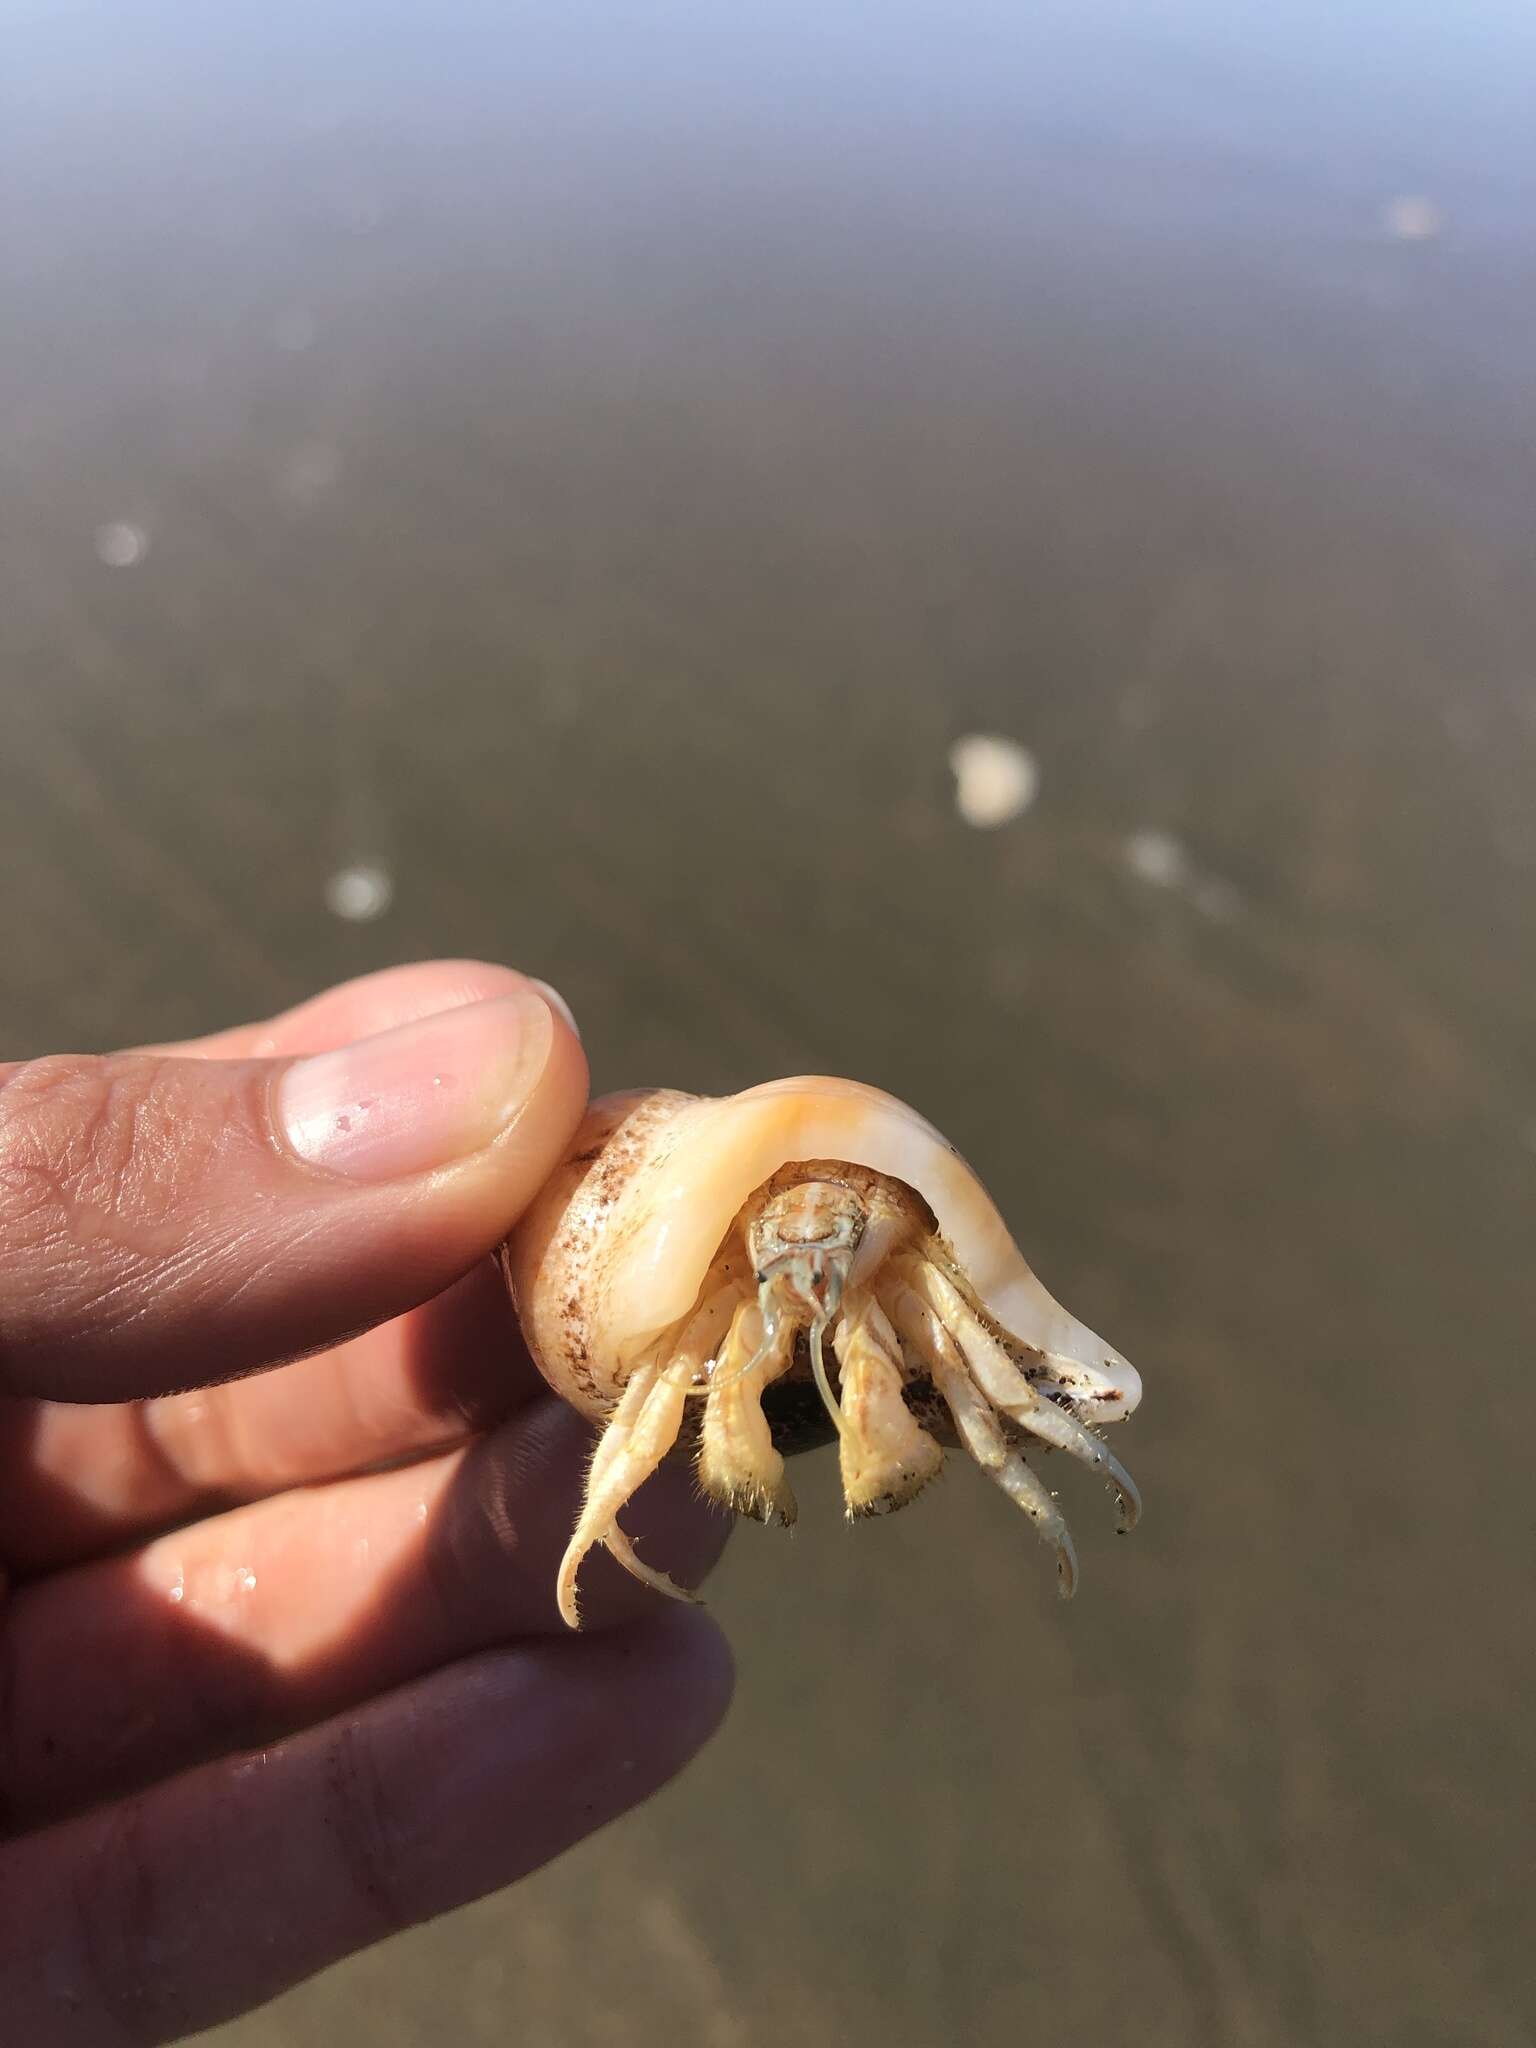 Image of moon snail hermit